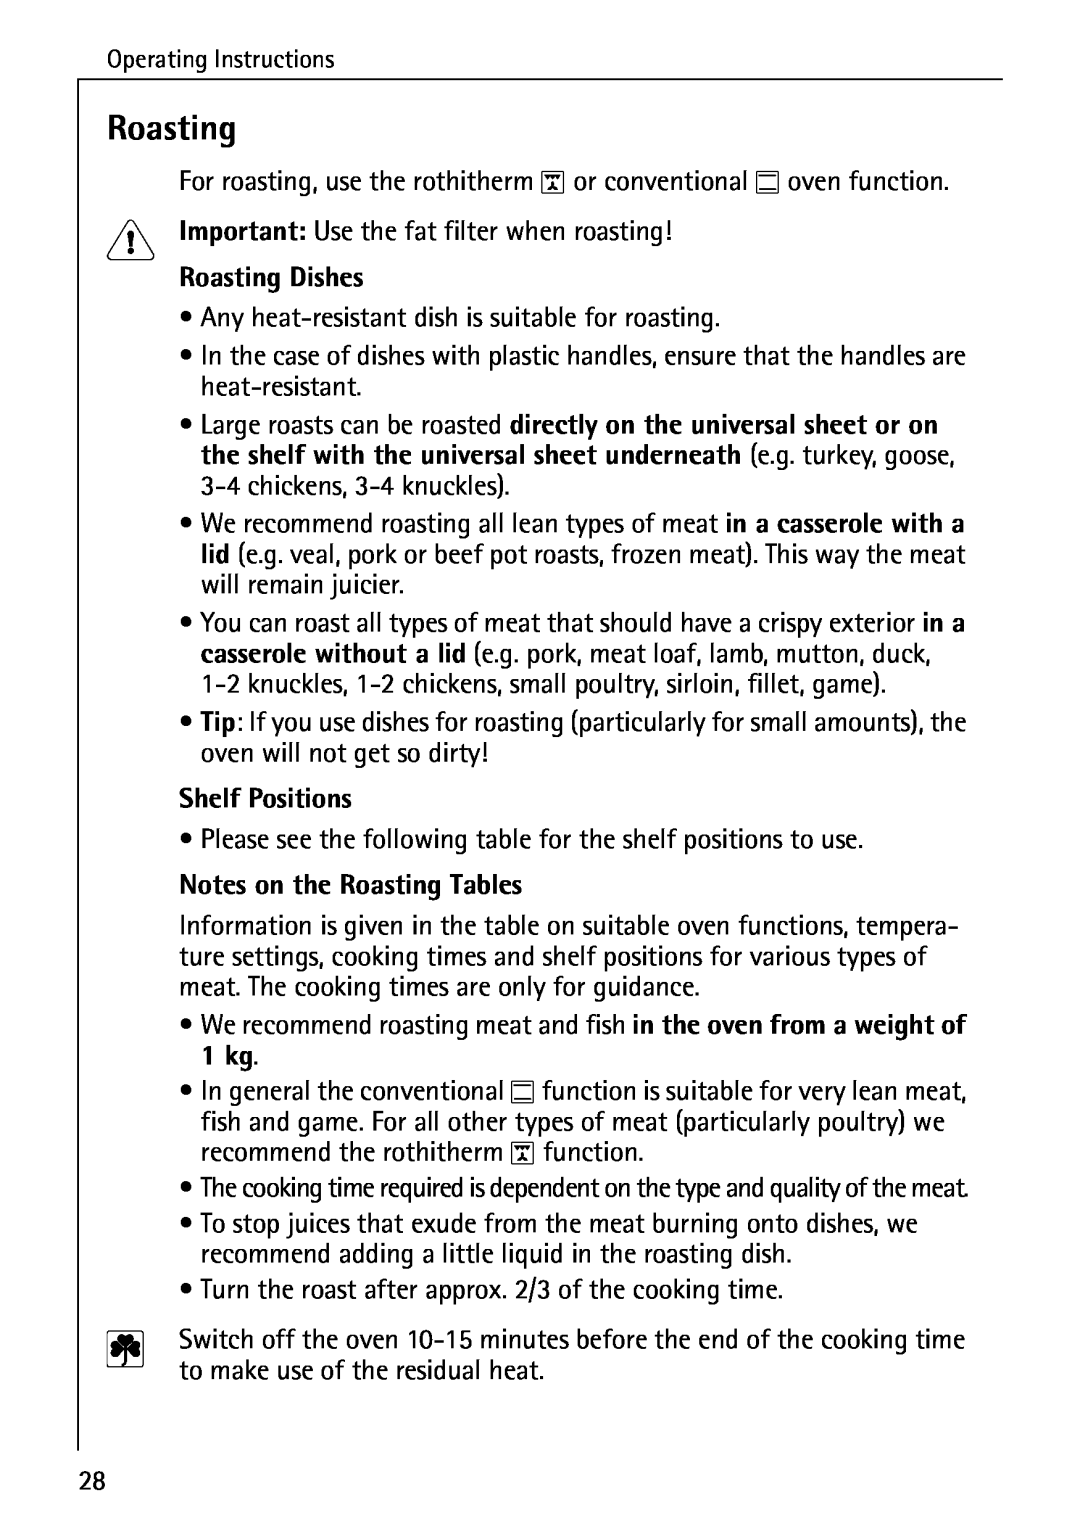 AEG B 4130 manual Roasting Dishes, Notes on the Roasting Tables, Shelf Positions 